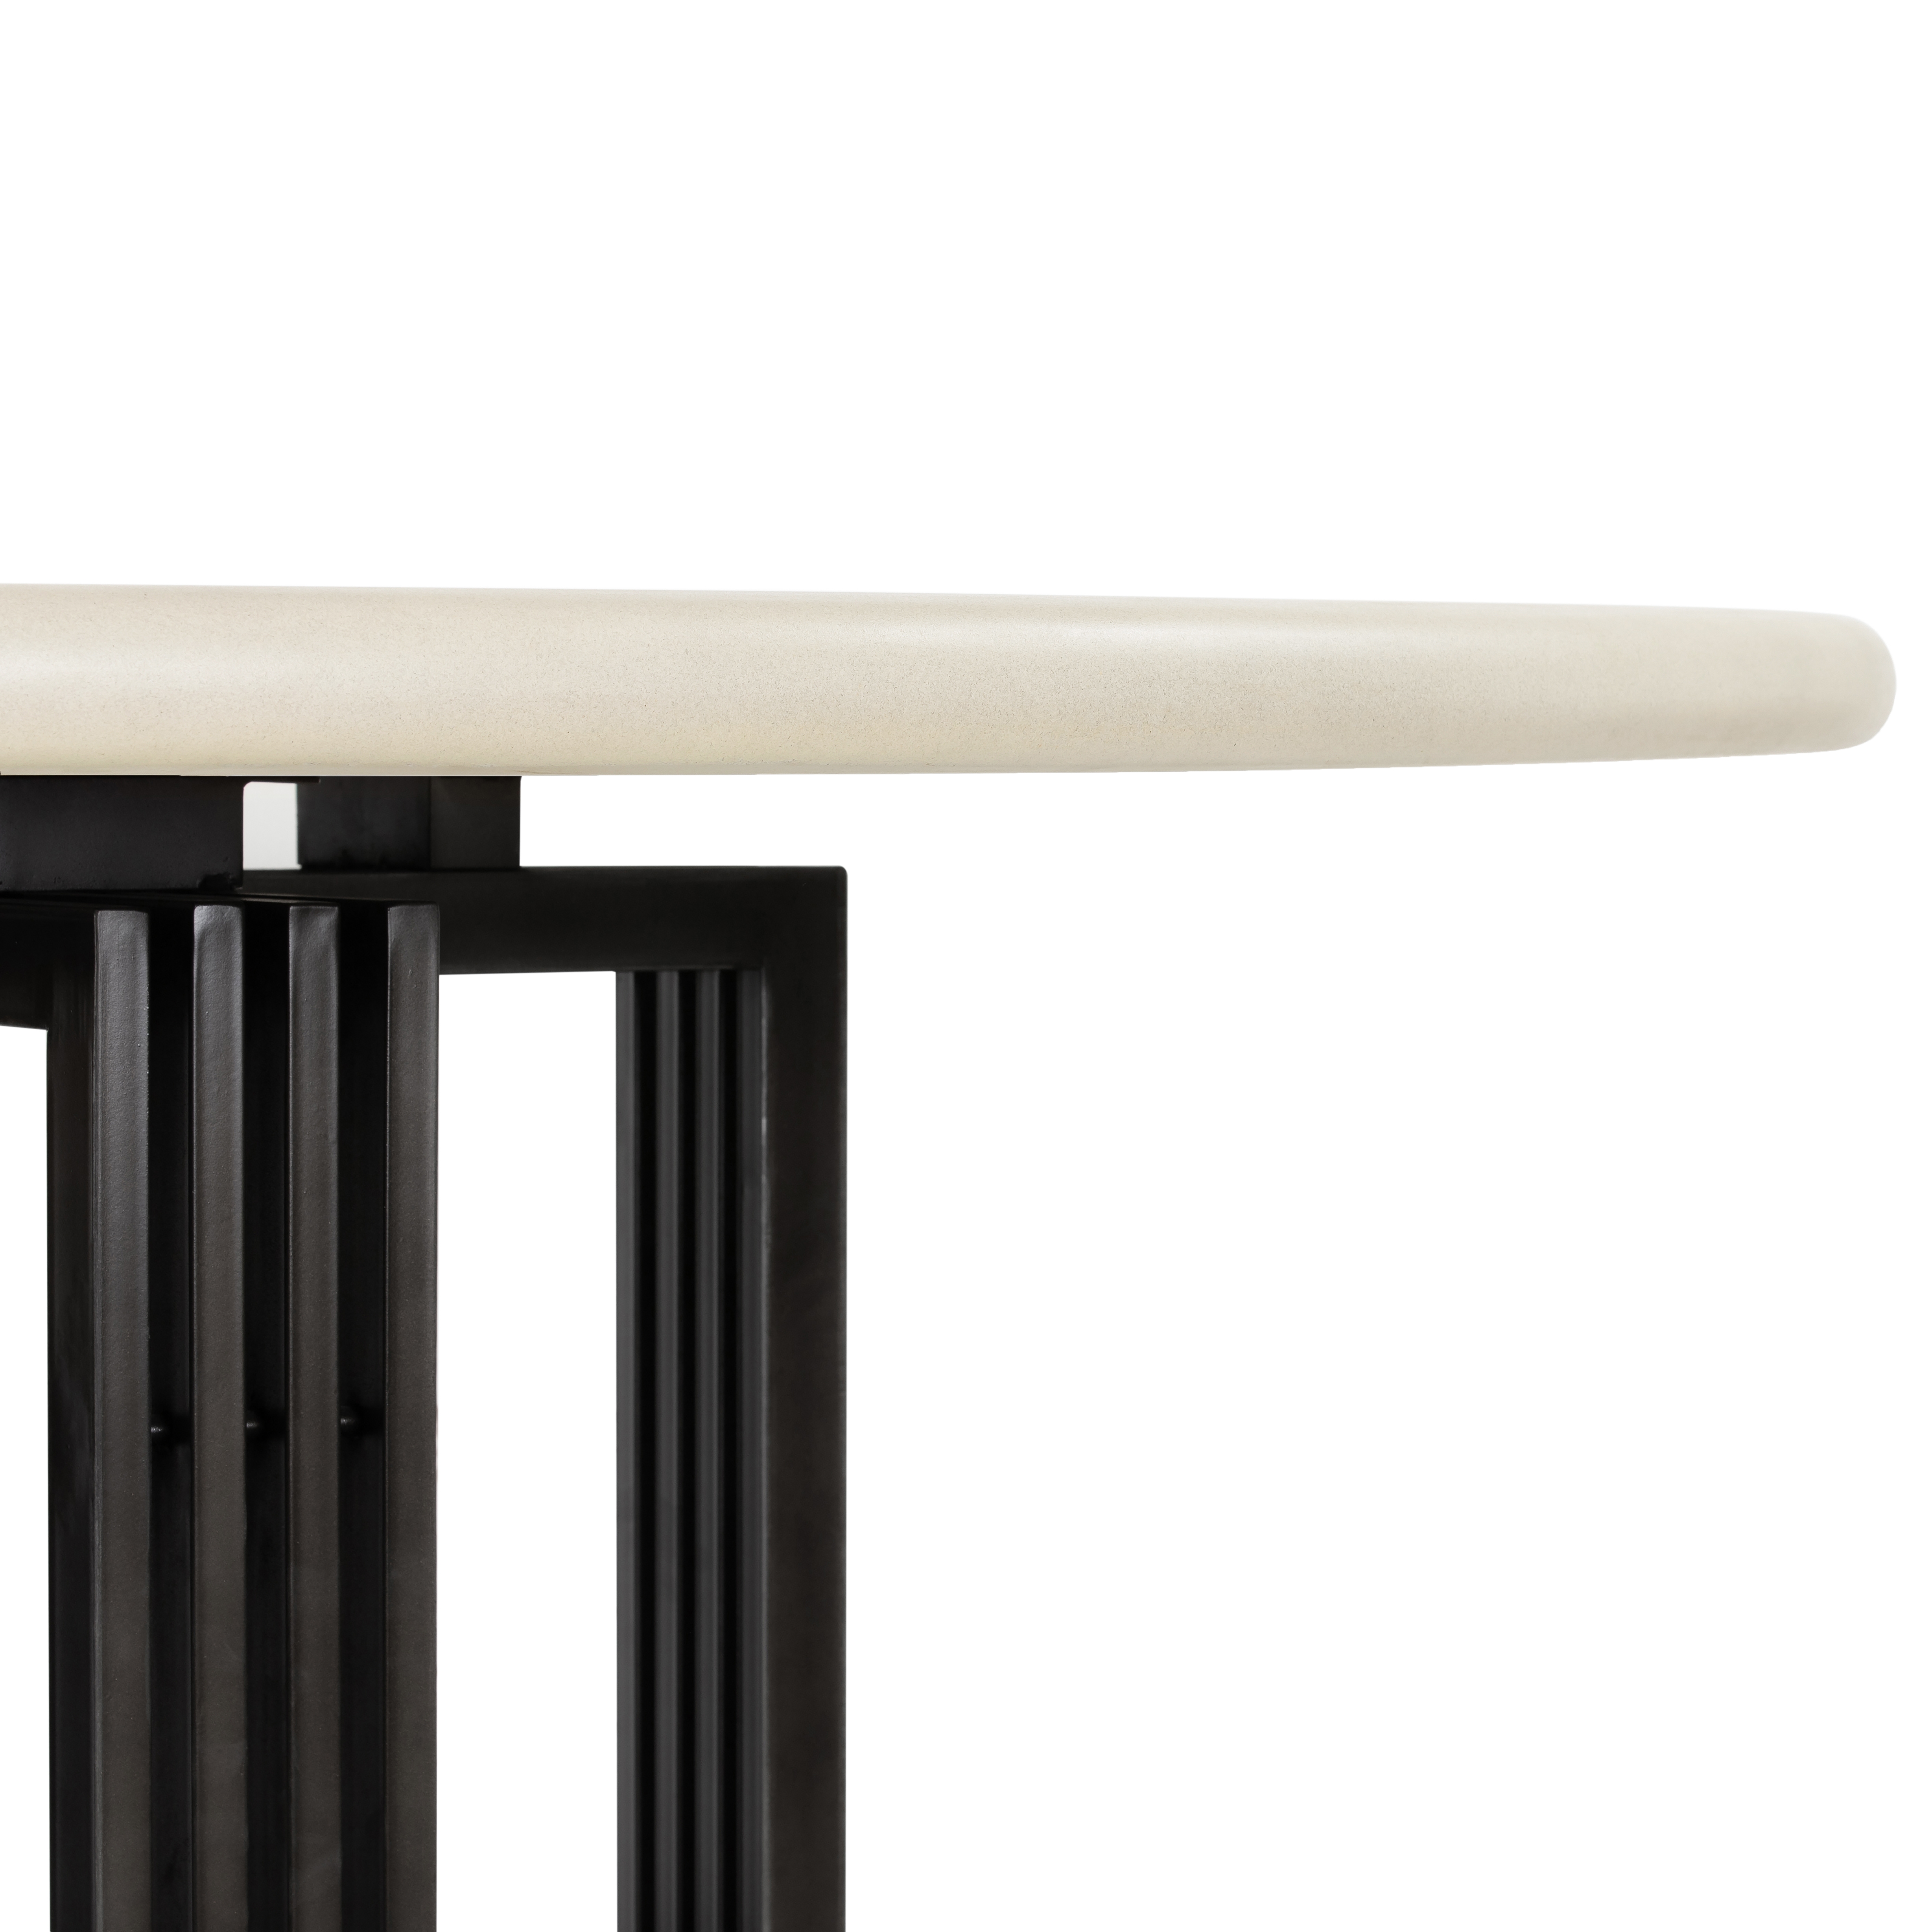 Mia Round Dining Table-Parchment White - Image 5